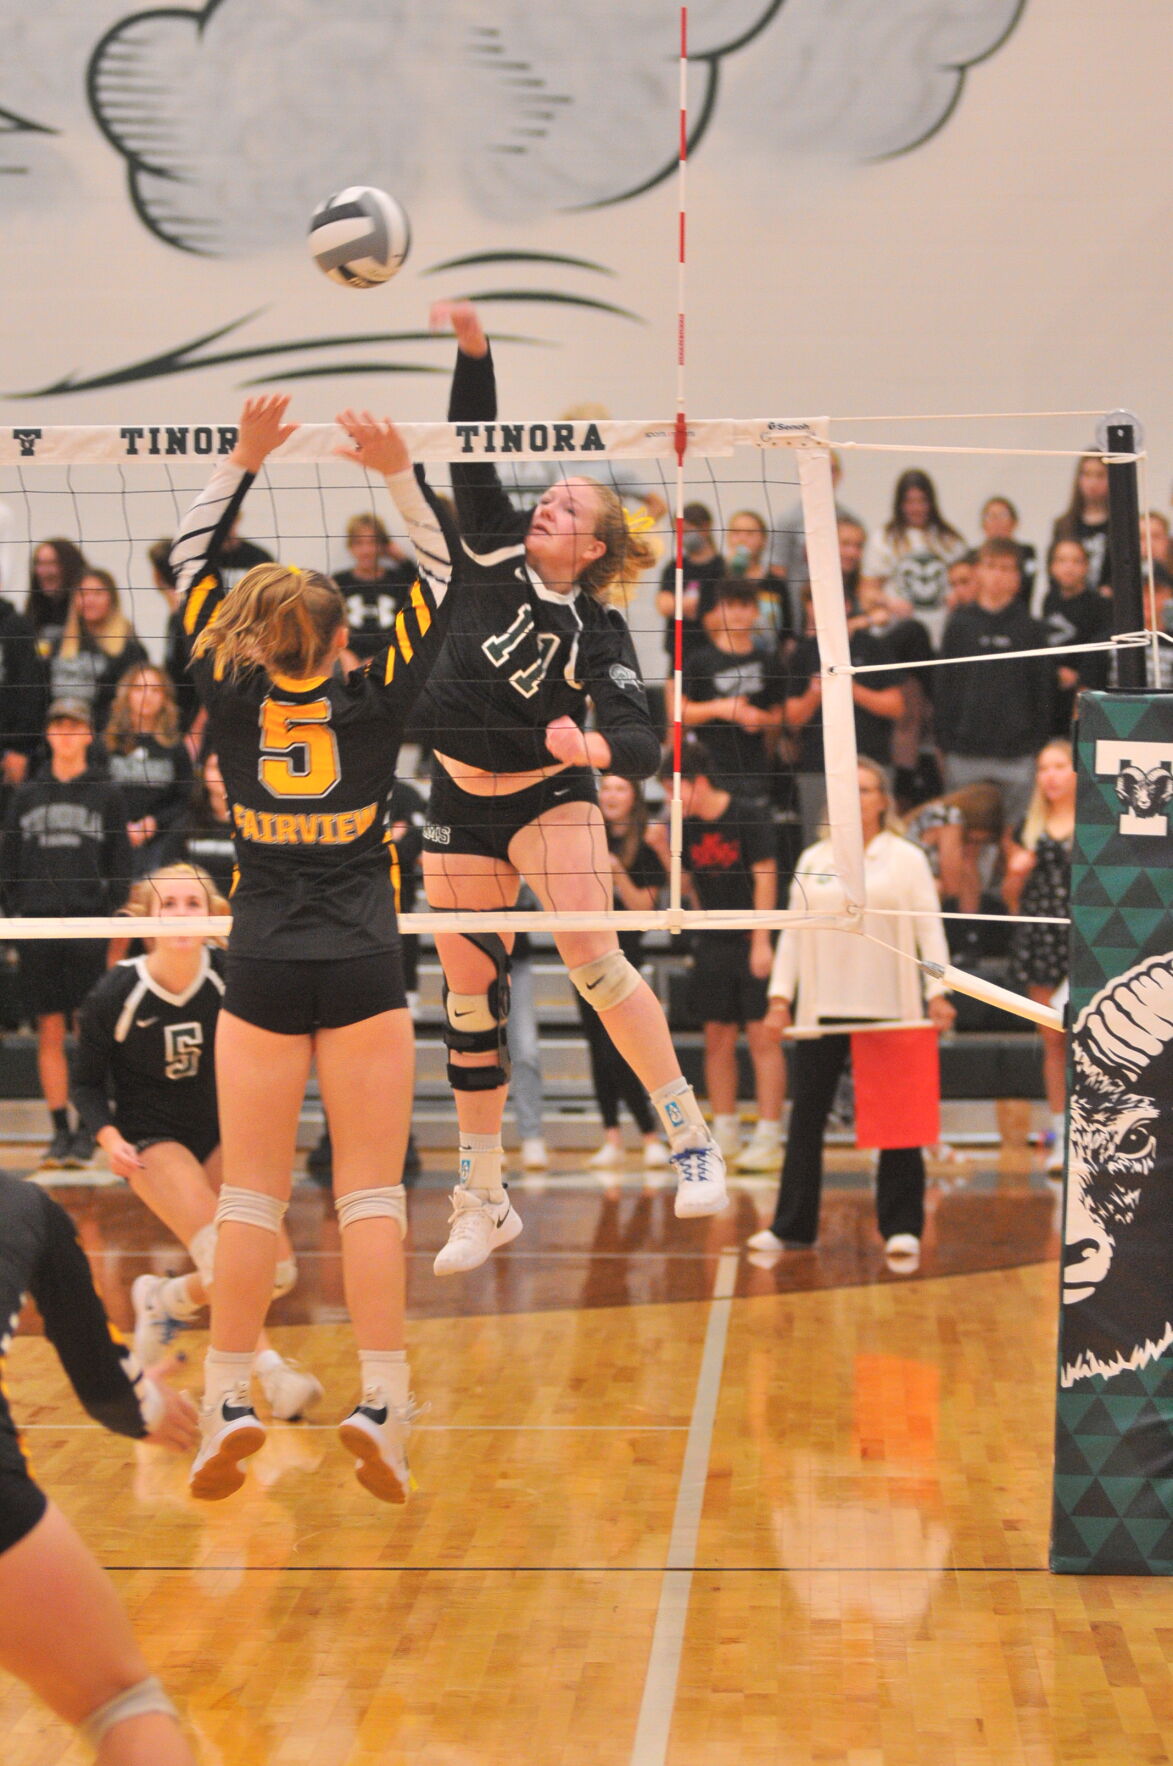 Thursday Volleyball Tinora Reclaims Gmc Title Over Fairview Local Sports Crescent News Com